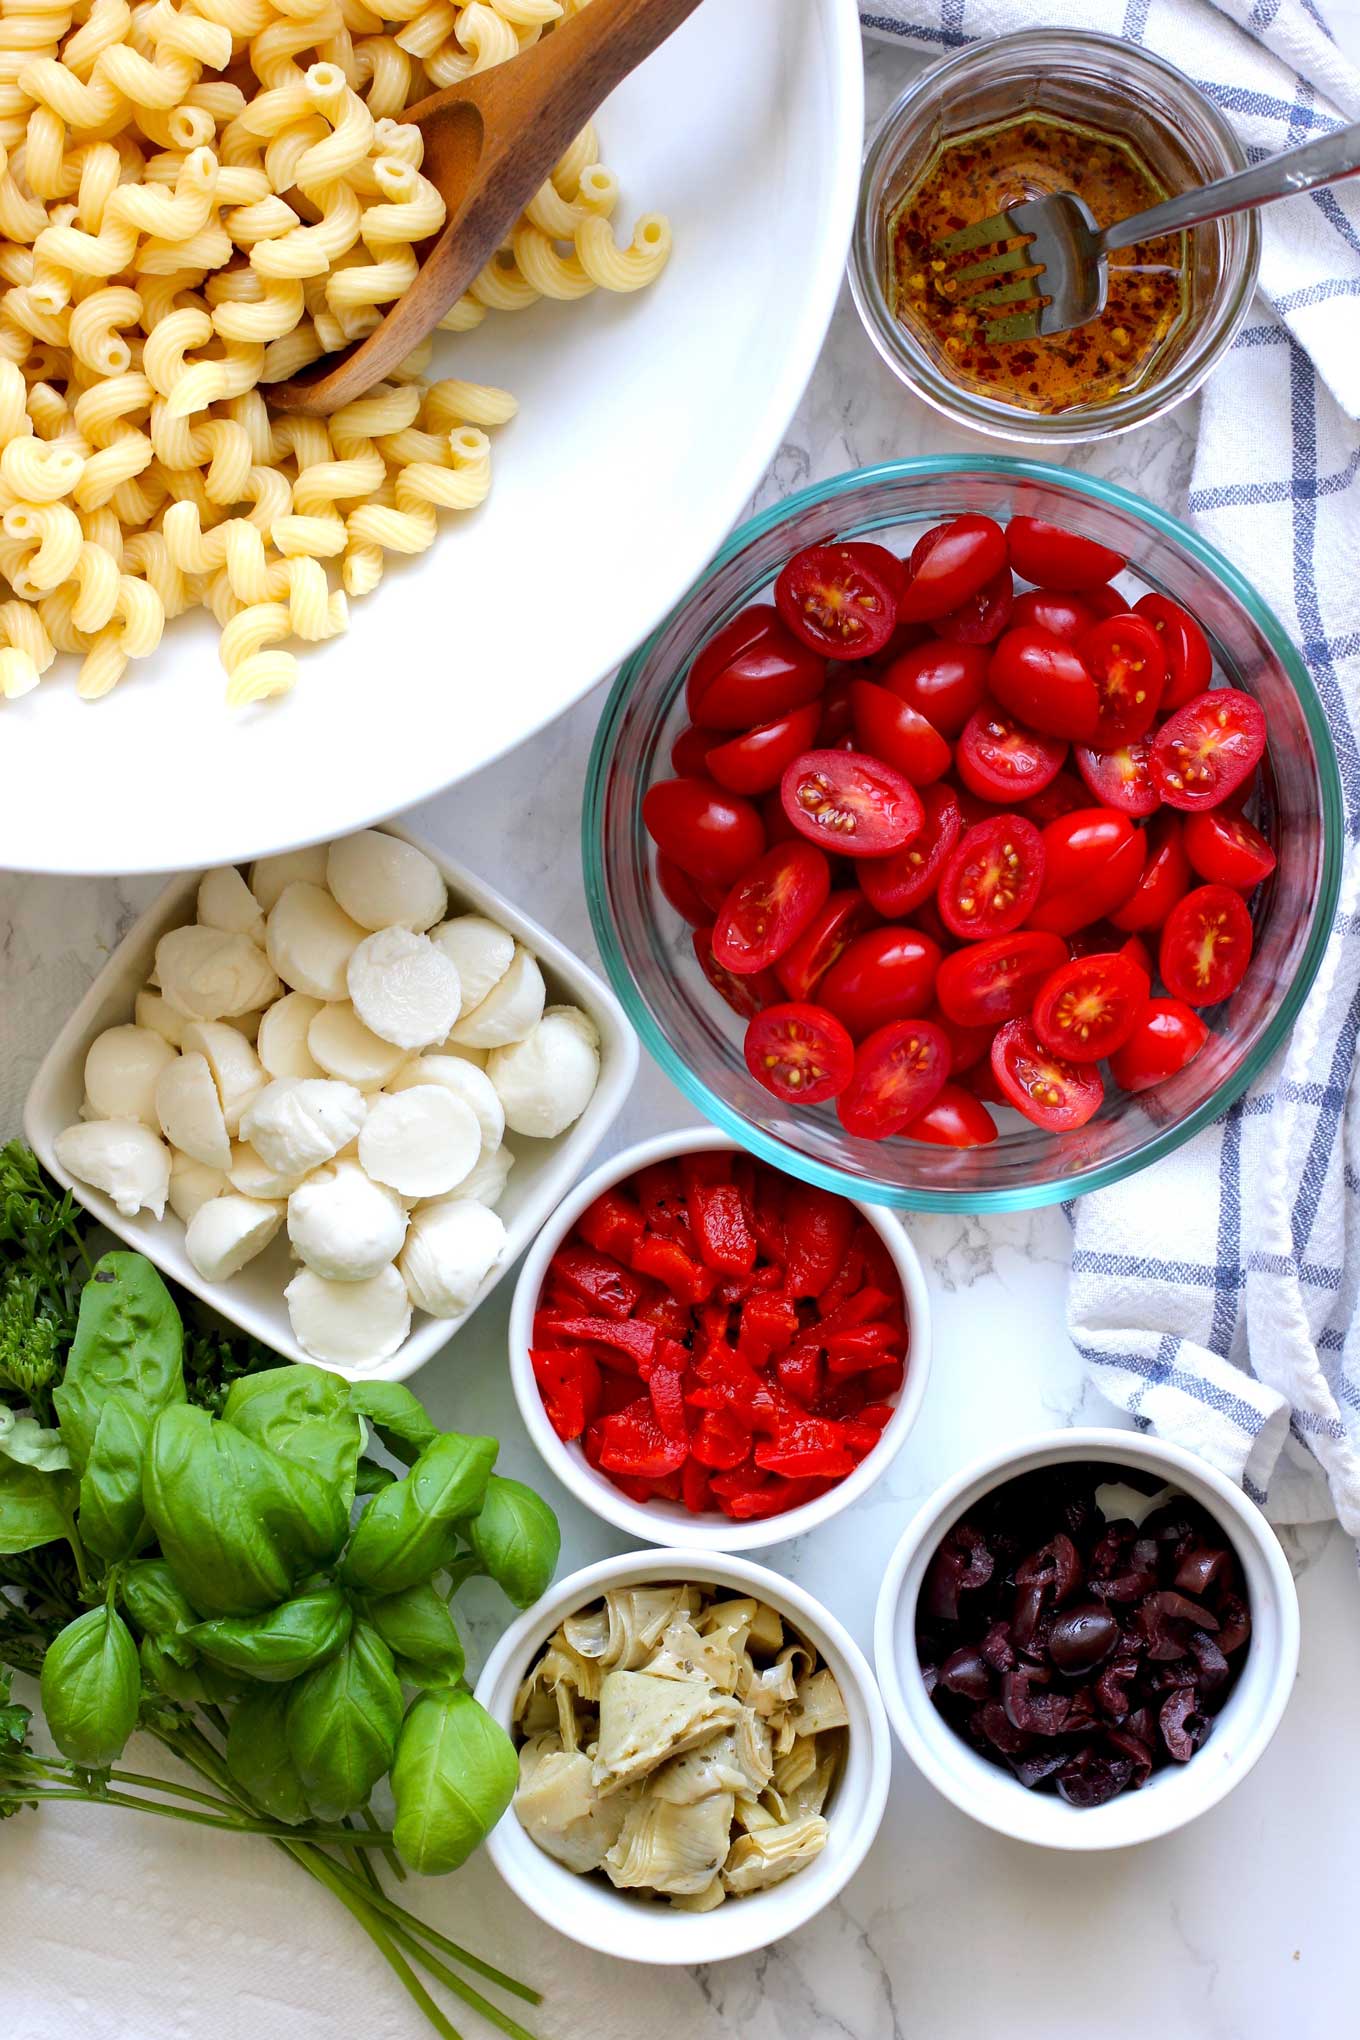 Ingredients to make pasta salad in individual ceramic bowls with fresh herbs and a blue and white napkin.